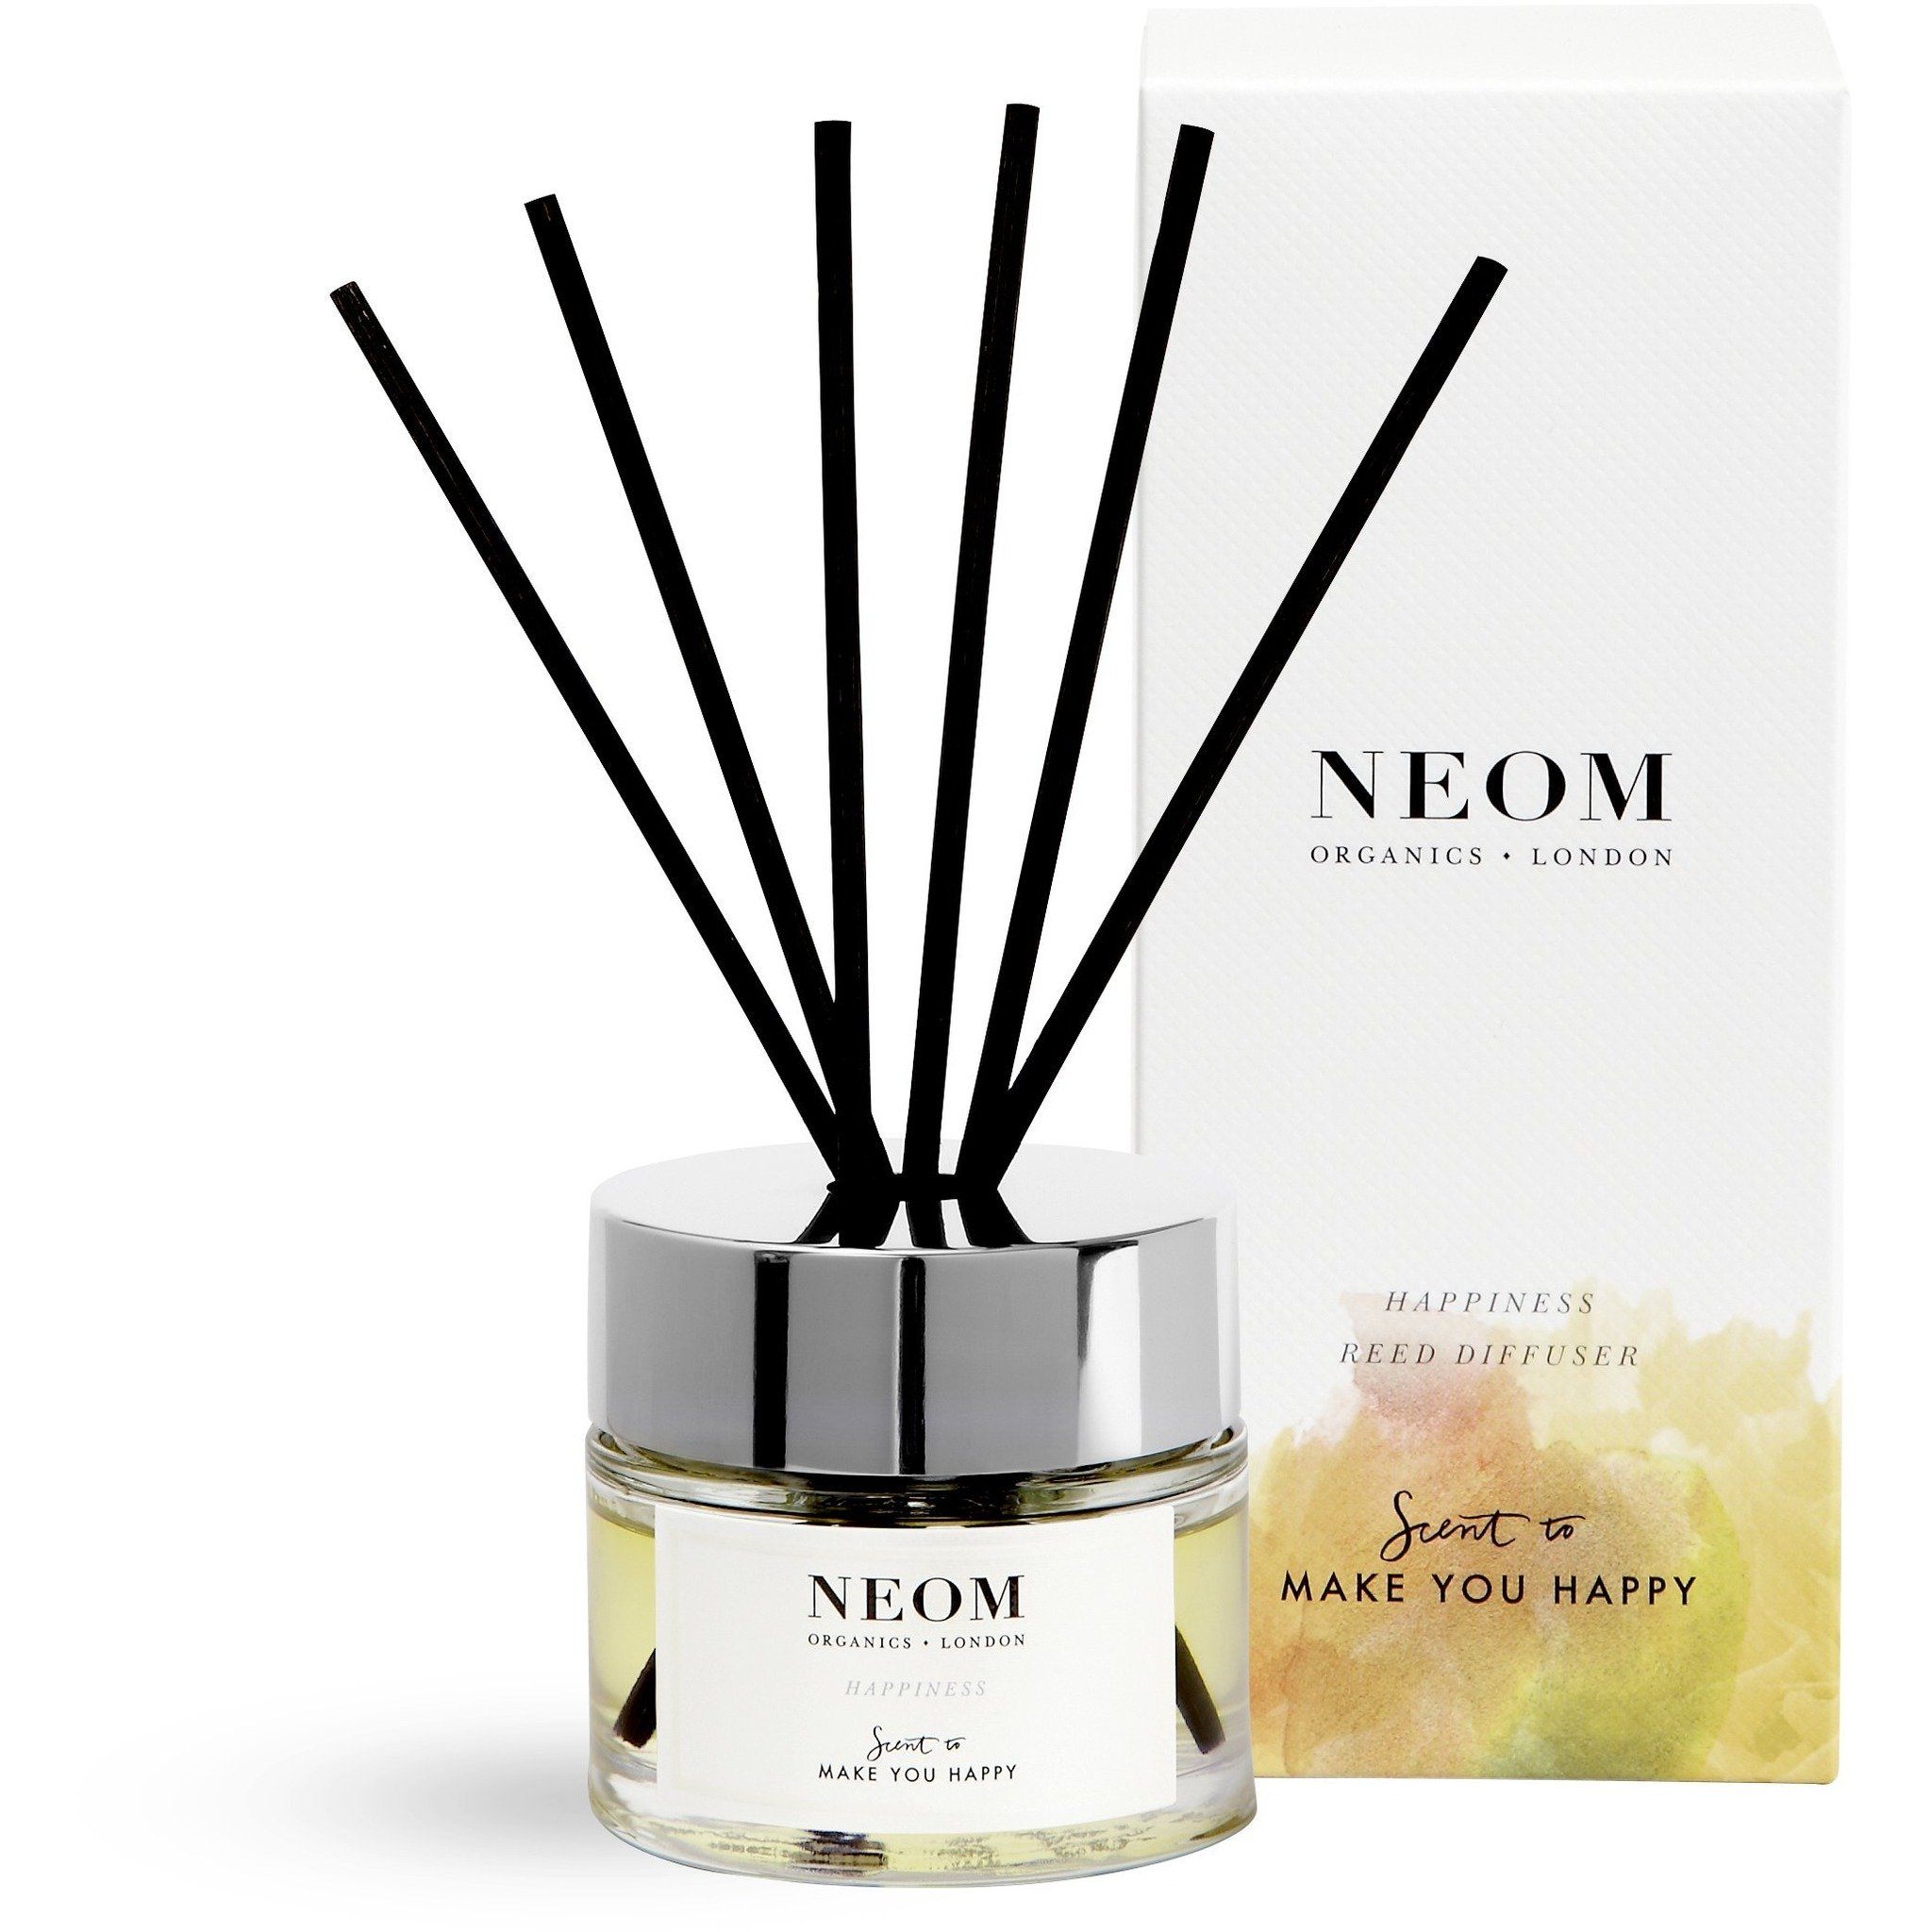 Neom Organics - Happiness Reed Diffuser - Kate's Kitchen